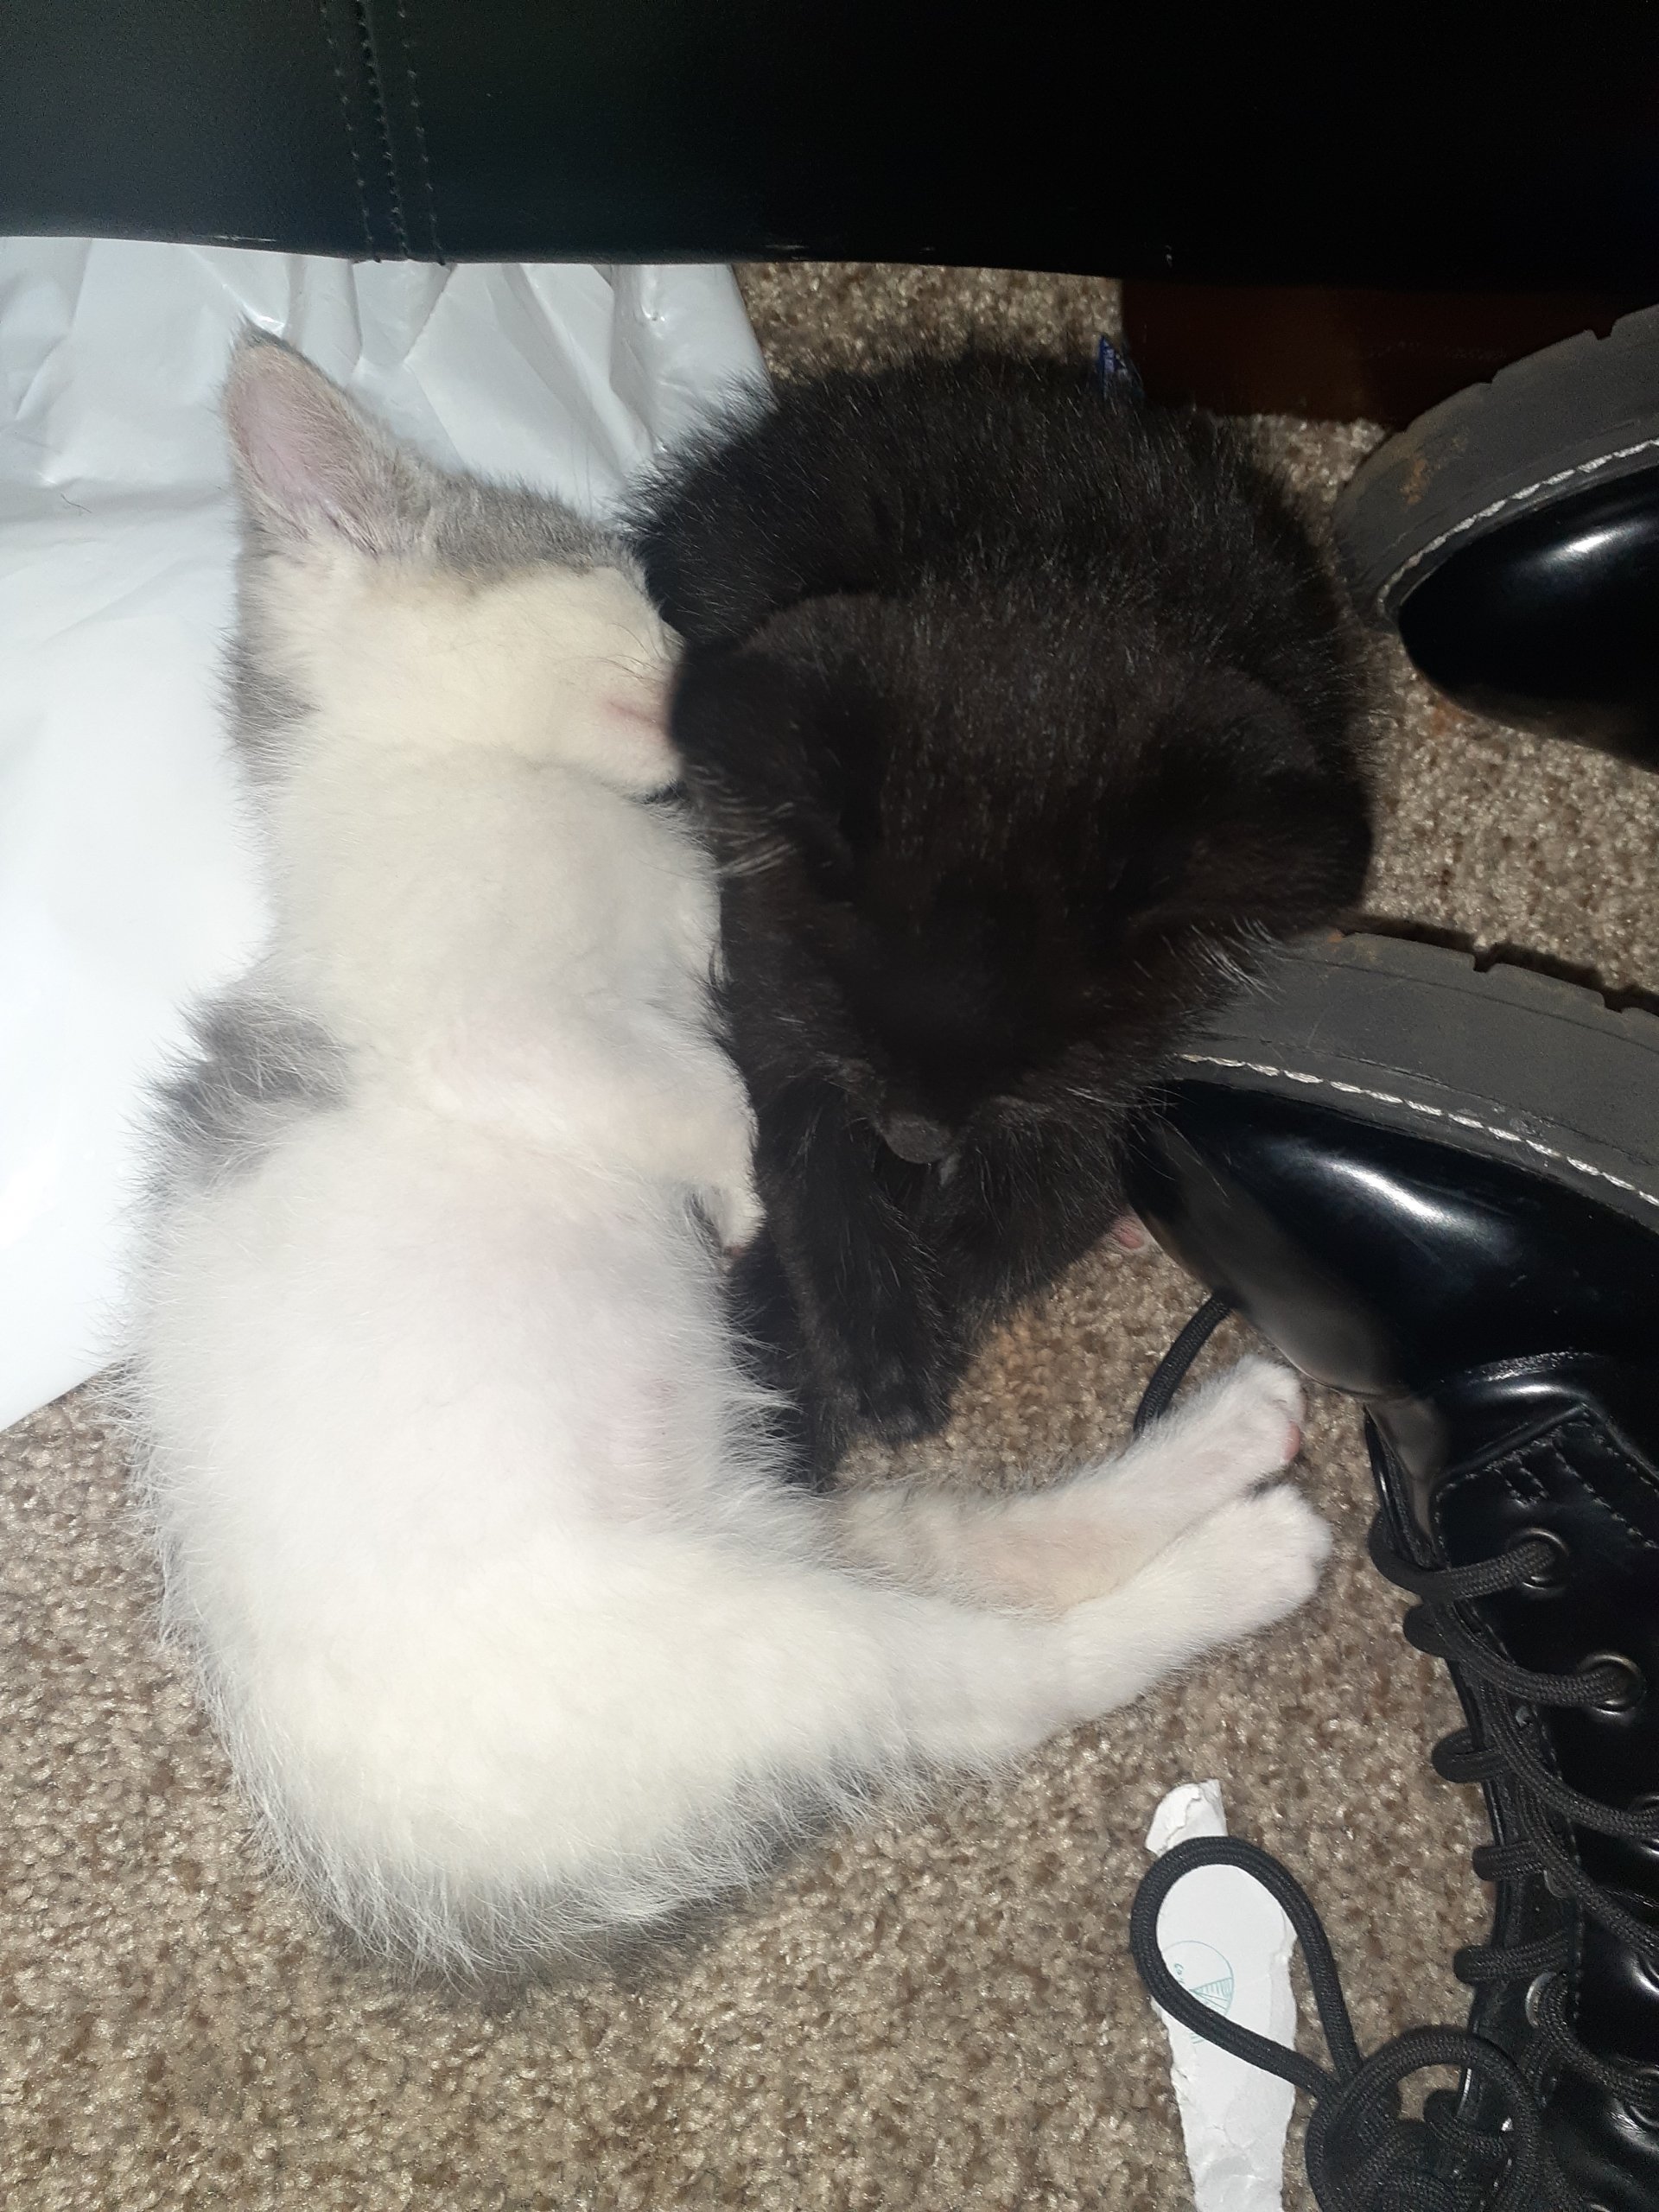 My house has been invaded by cuteness.  This is Luna (black kitty) and Gypsy (white kitty). They're my granddaughters new pets and the best entertainment around. Watching them play is just too cute.